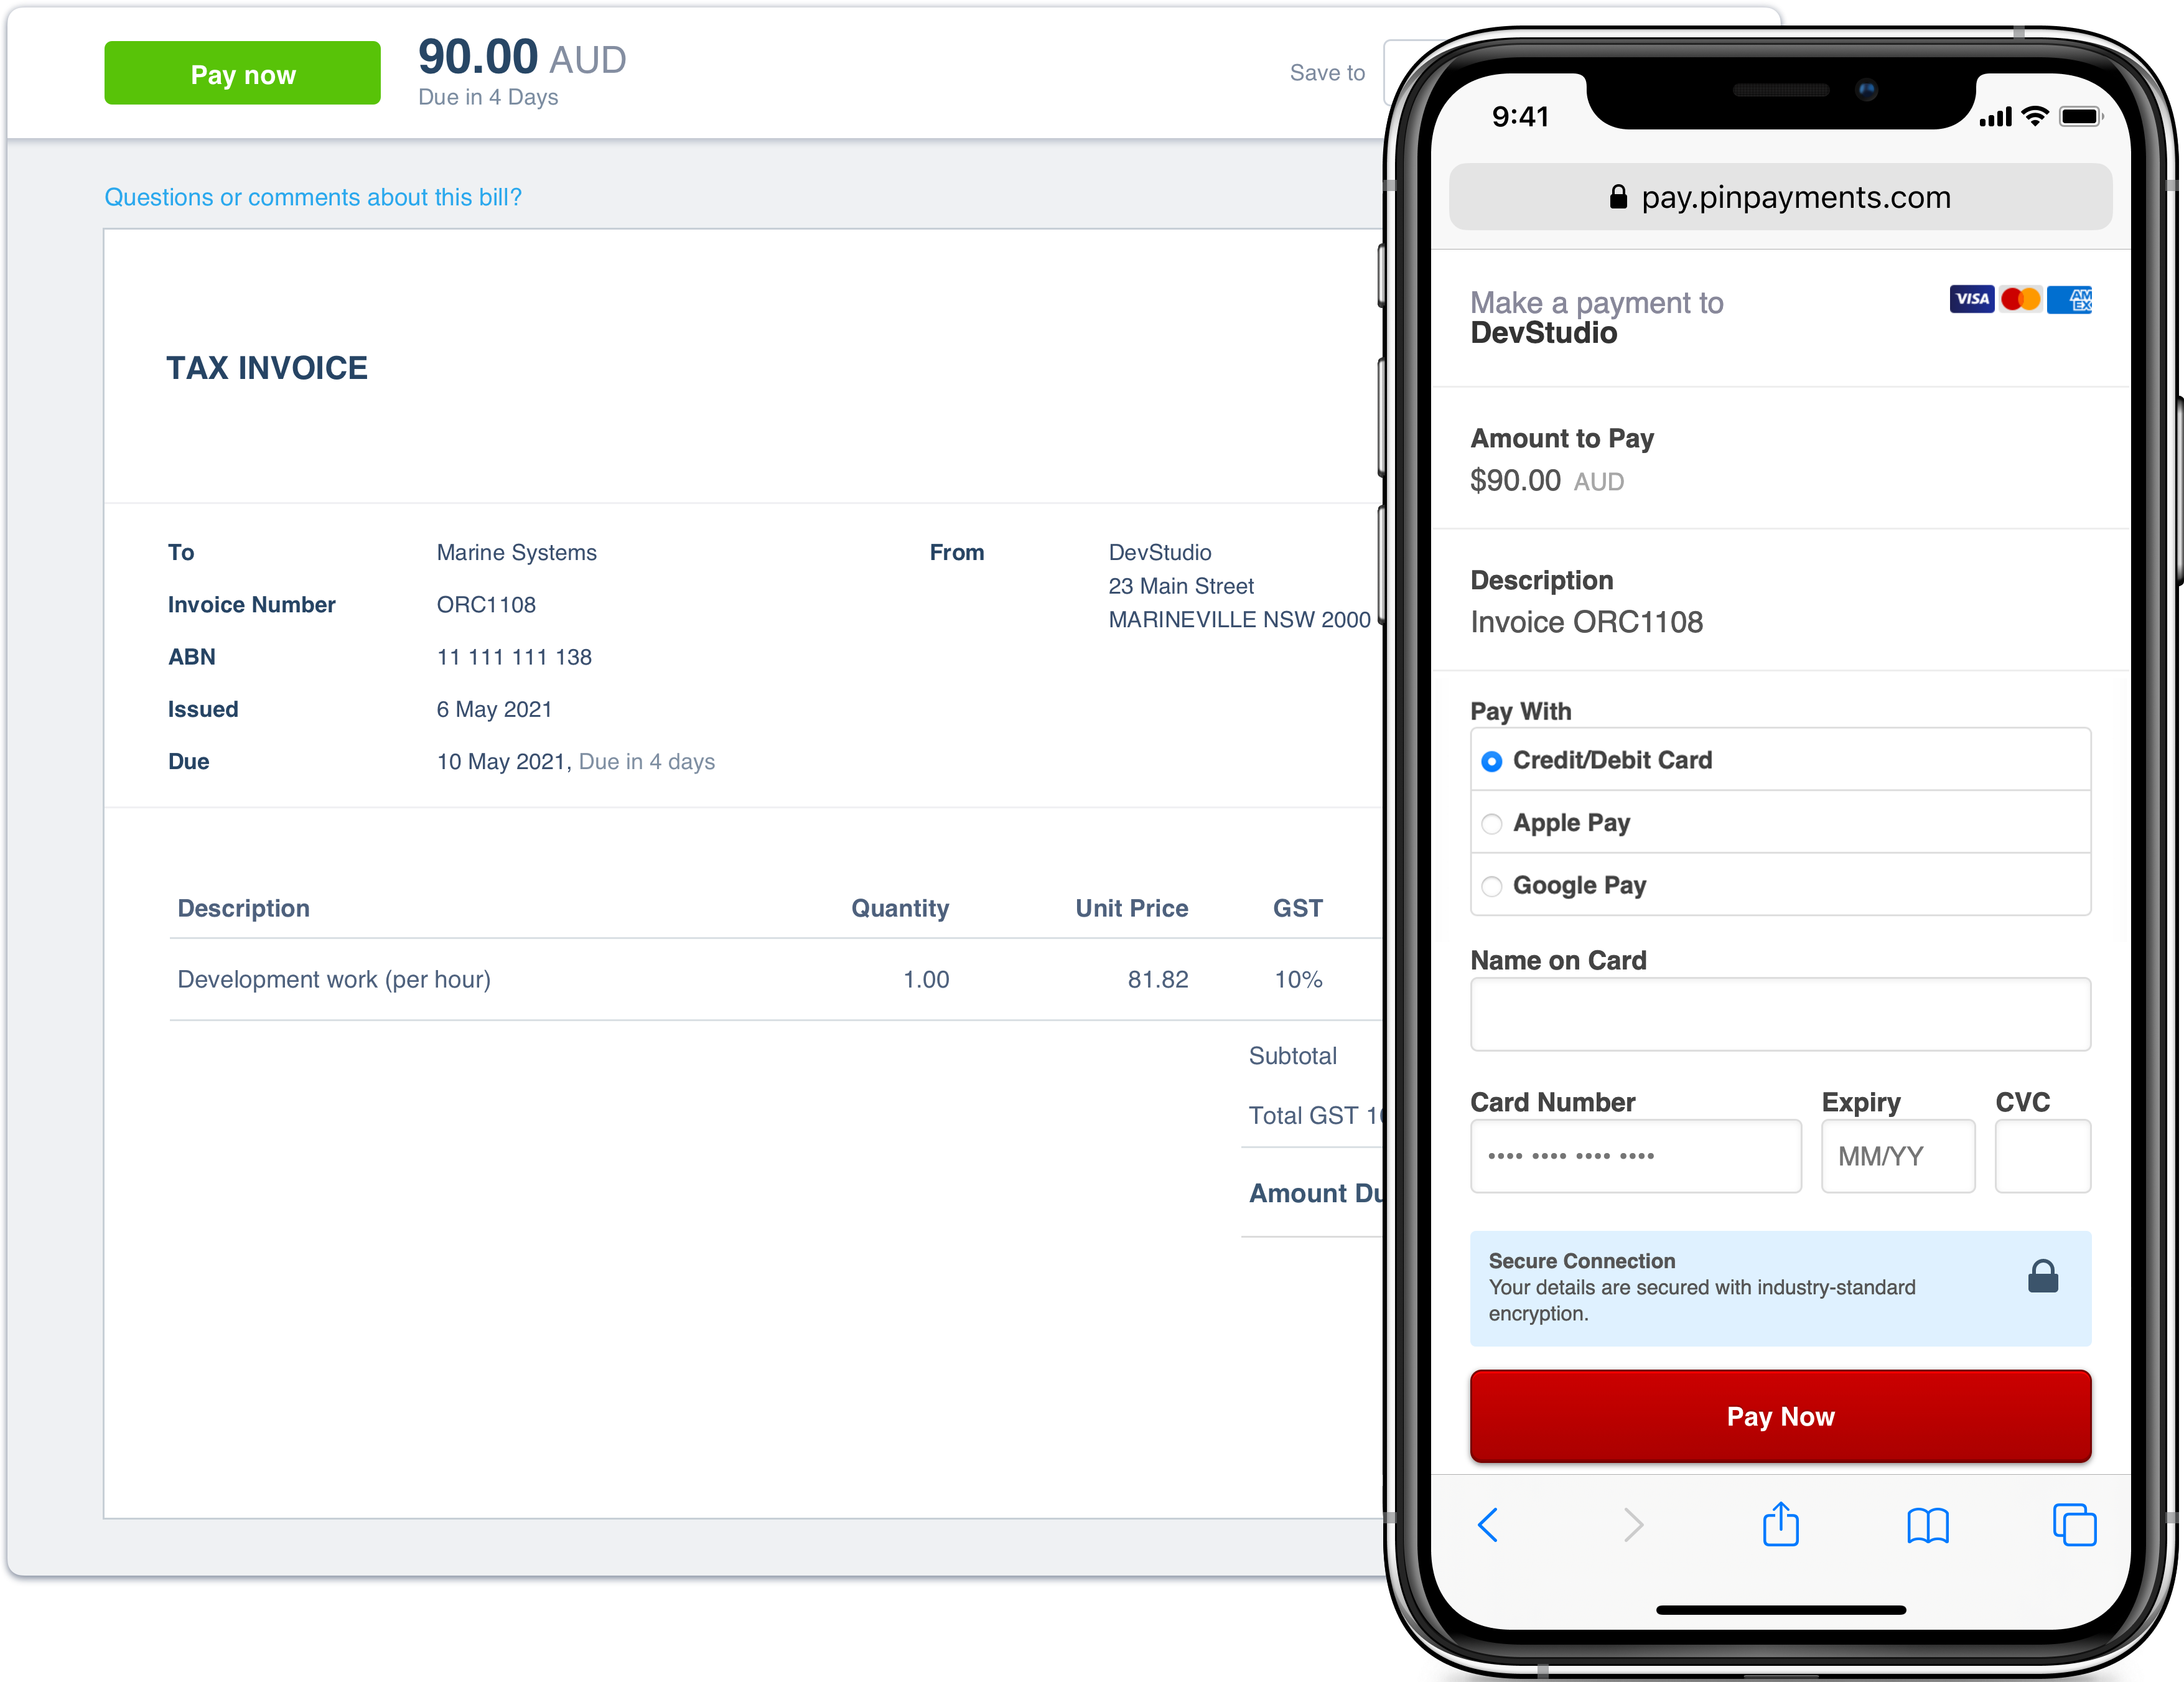 Mobile view of an invoice payment with the option to pay with a credit or debit card, Apple Pay or Google Pay.